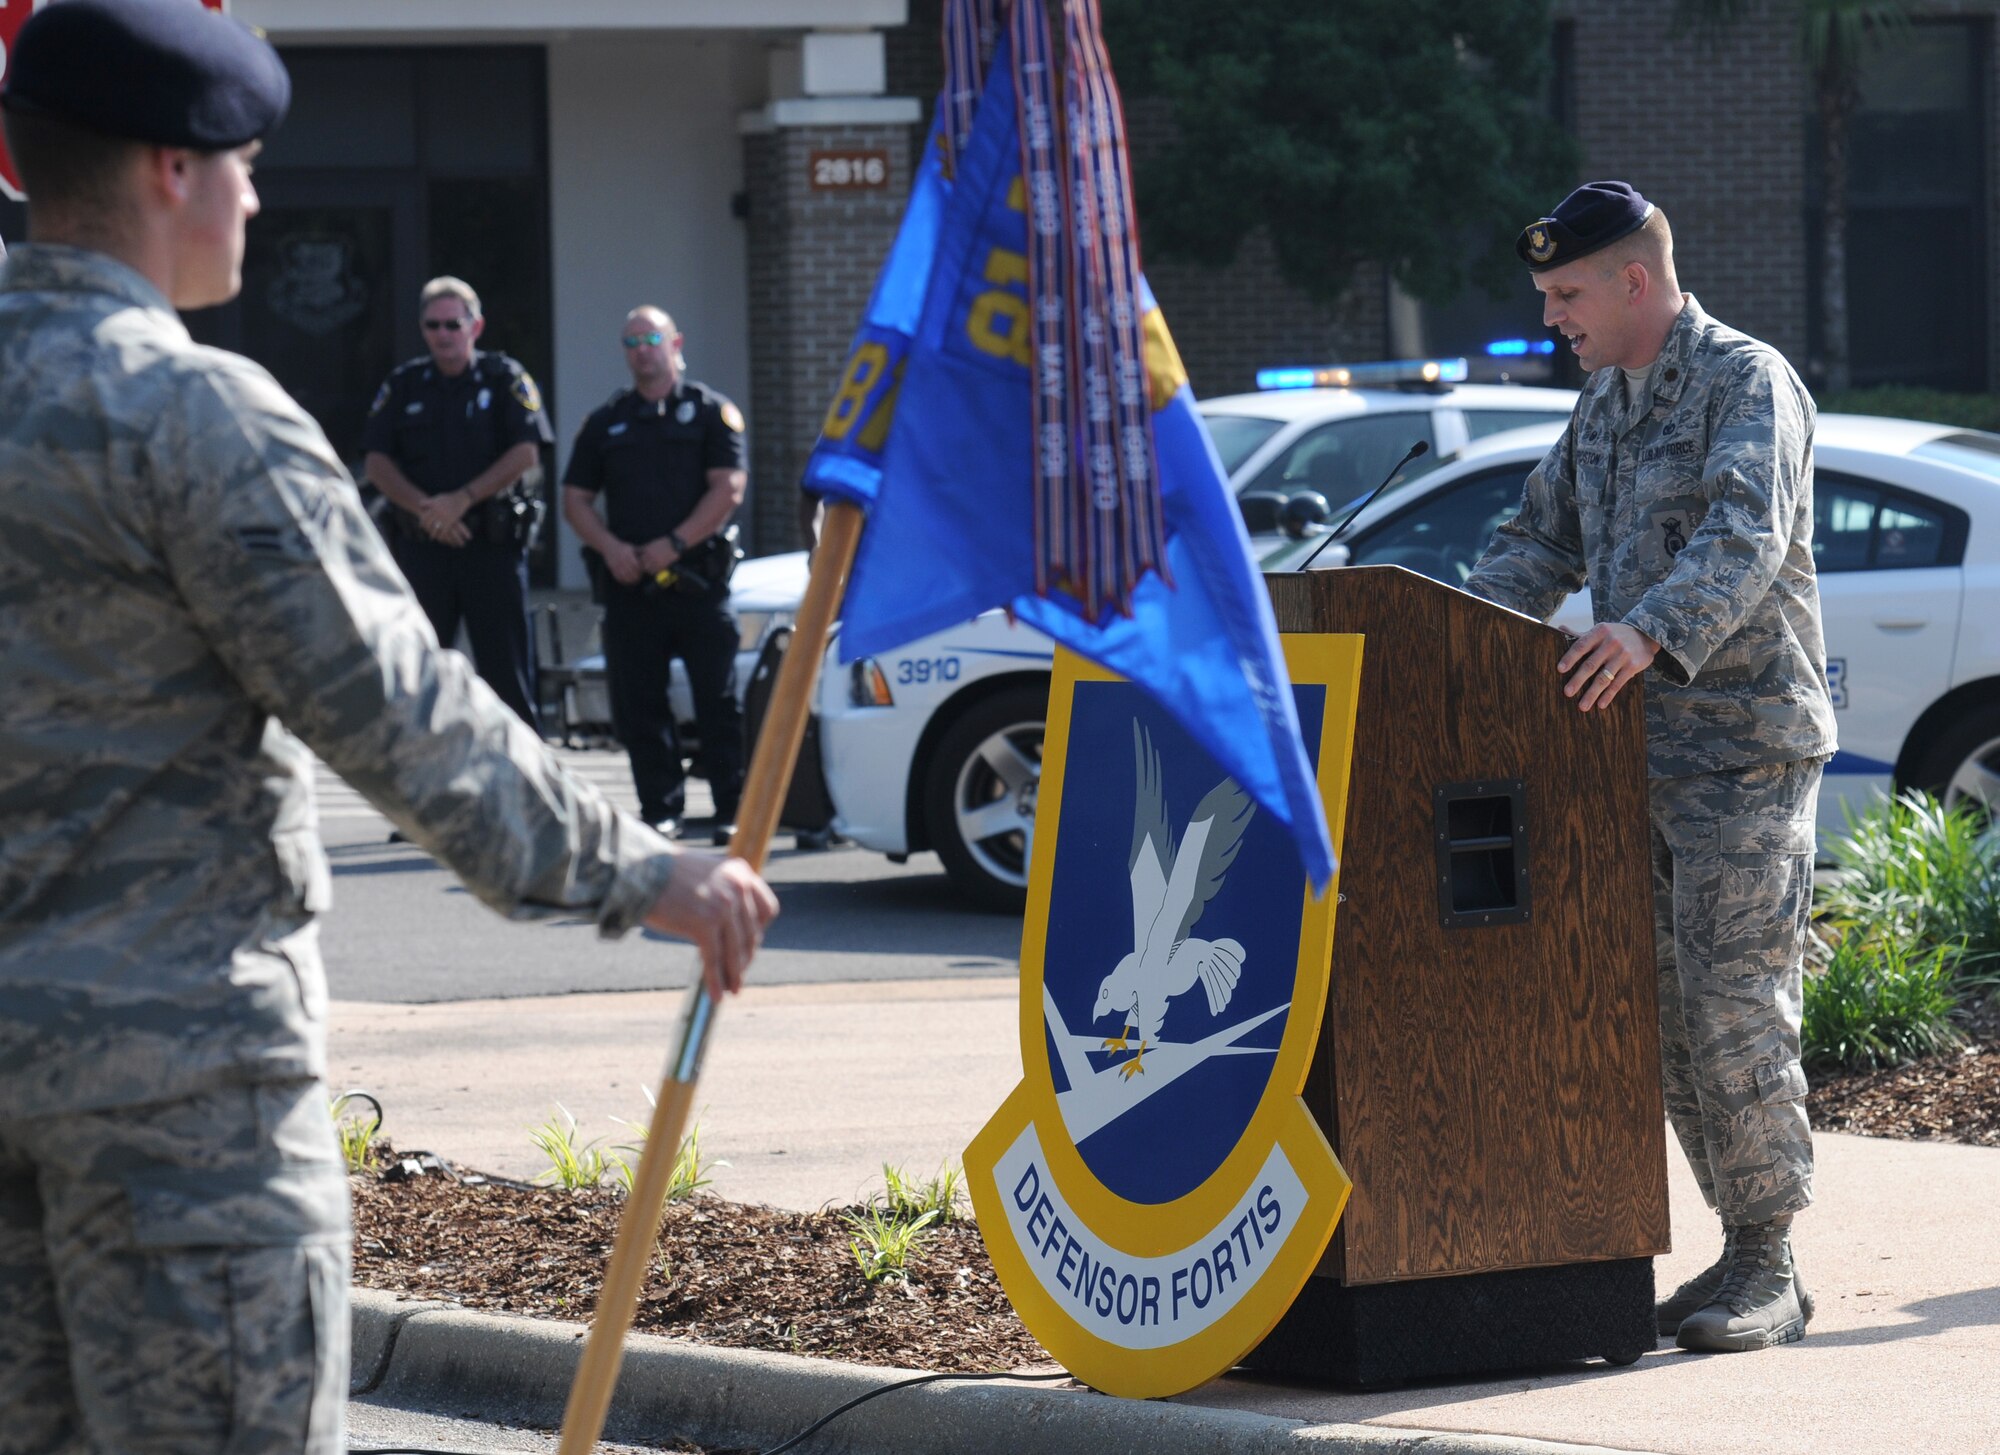 Maj. Devin Sproston, 81st Security Forces Squadron commander, delivers remarks during the 81st SFS Retreat Ceremony May 19, 2016, Keesler Air Force Base, Miss. The ceremony was held during National Police Week, which recognizes the service of law enforcement men and women who put their lives at risk every day. (U.S. Air Force photo by Kemberly Groue)